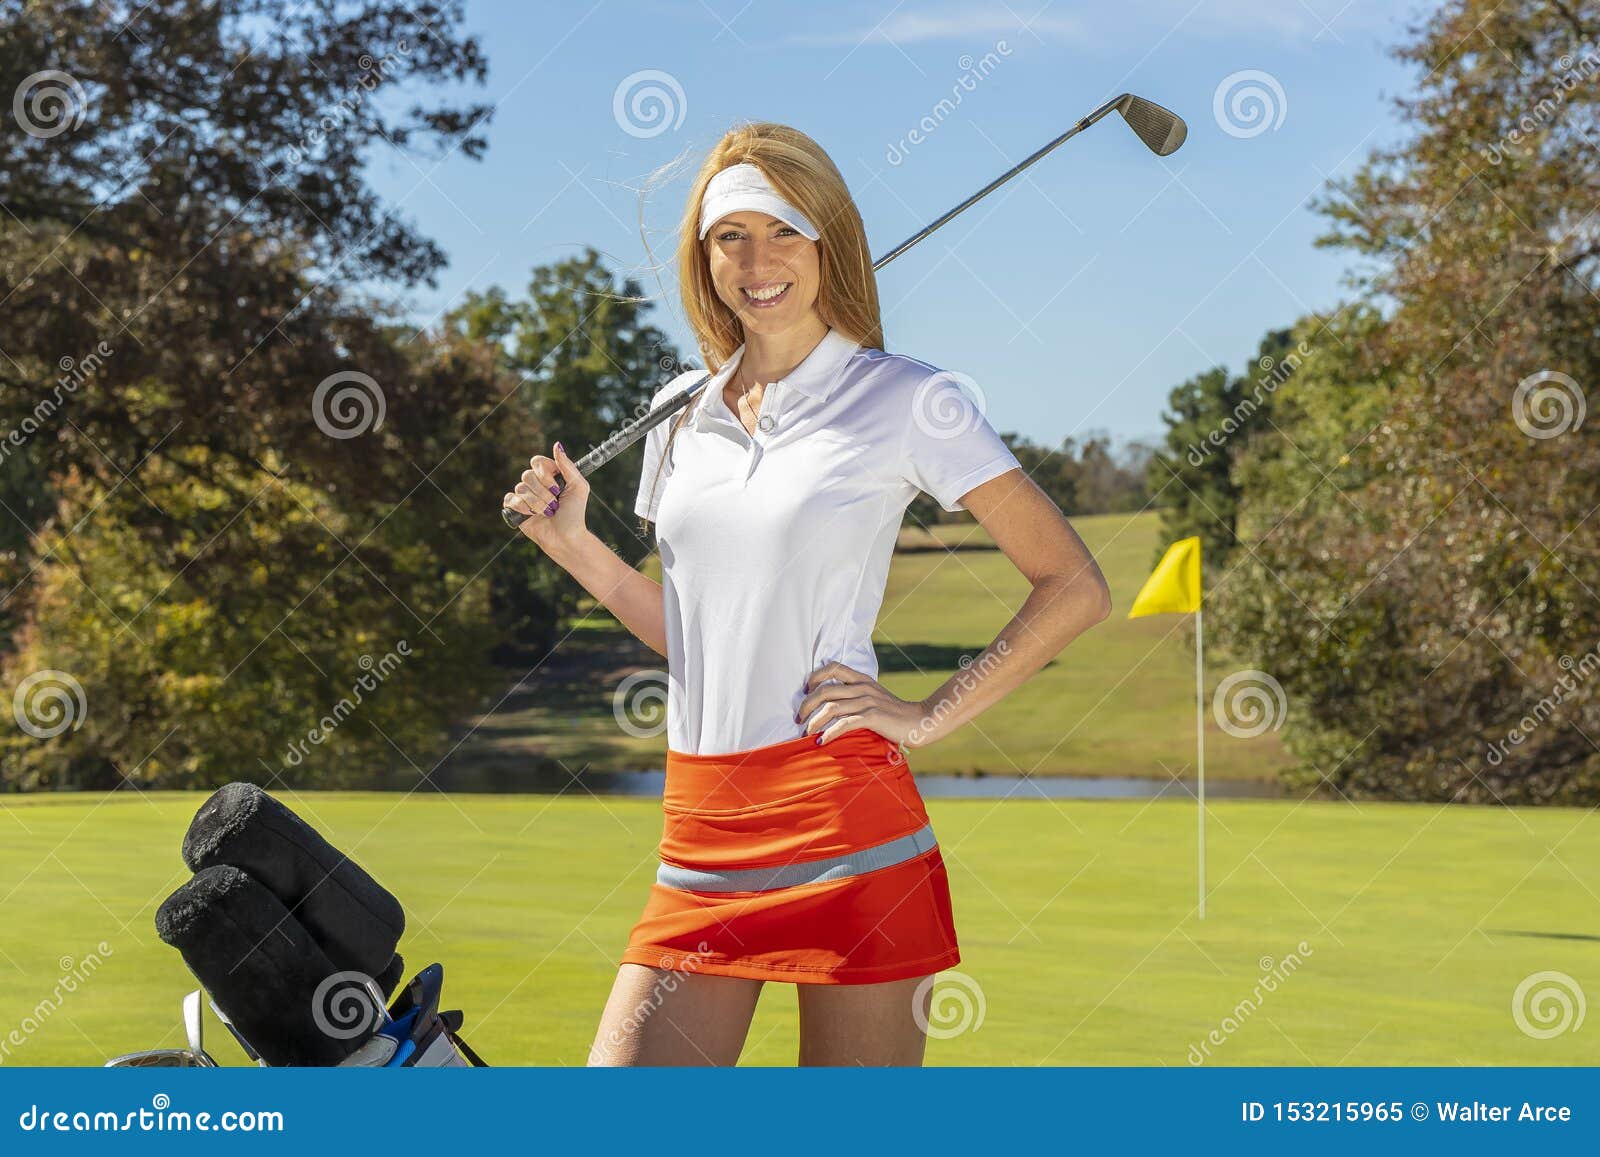 golfers with blonde hair